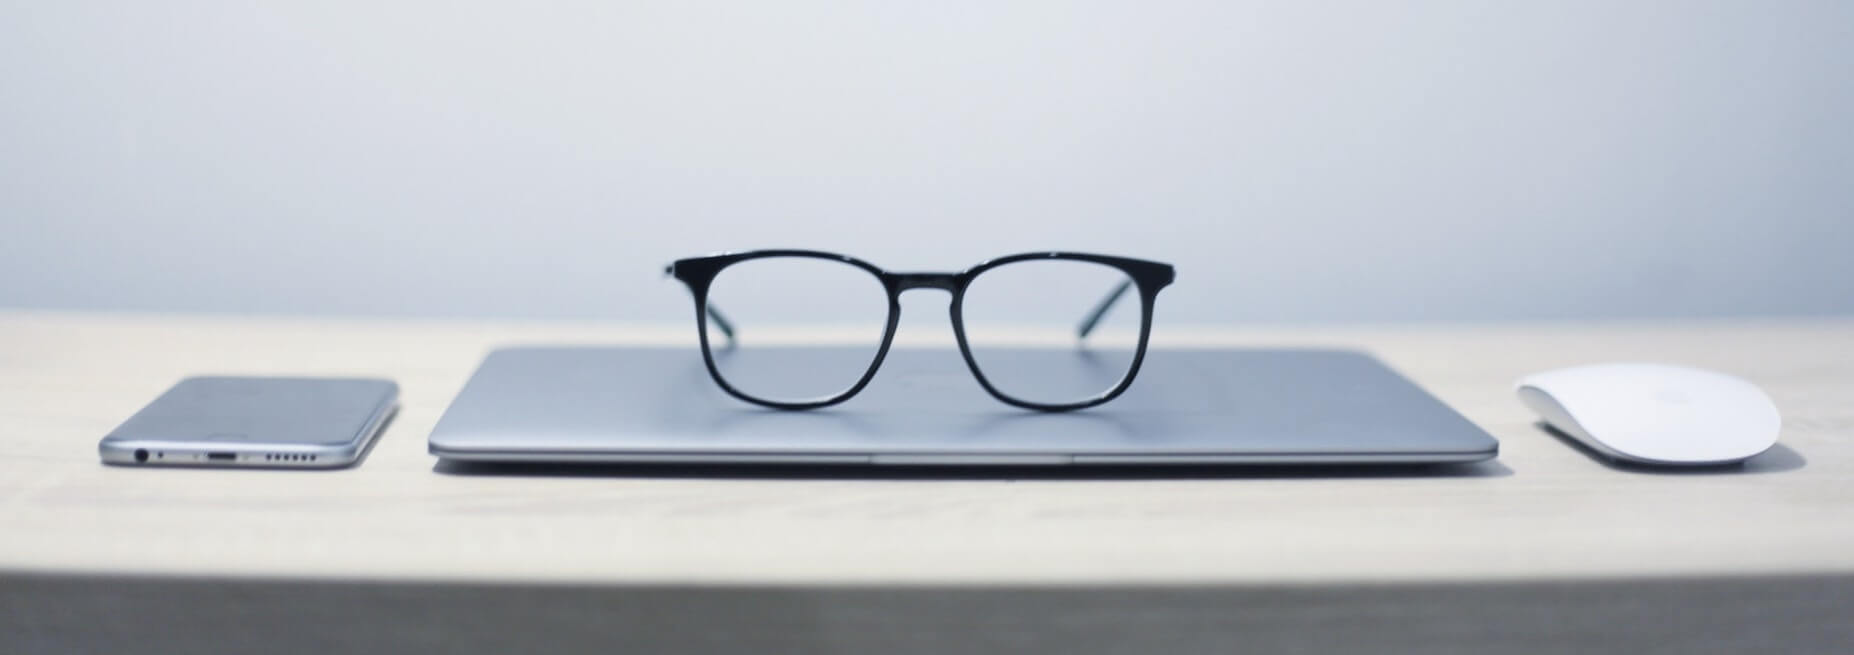 pair of glasses resting on a mac laptop